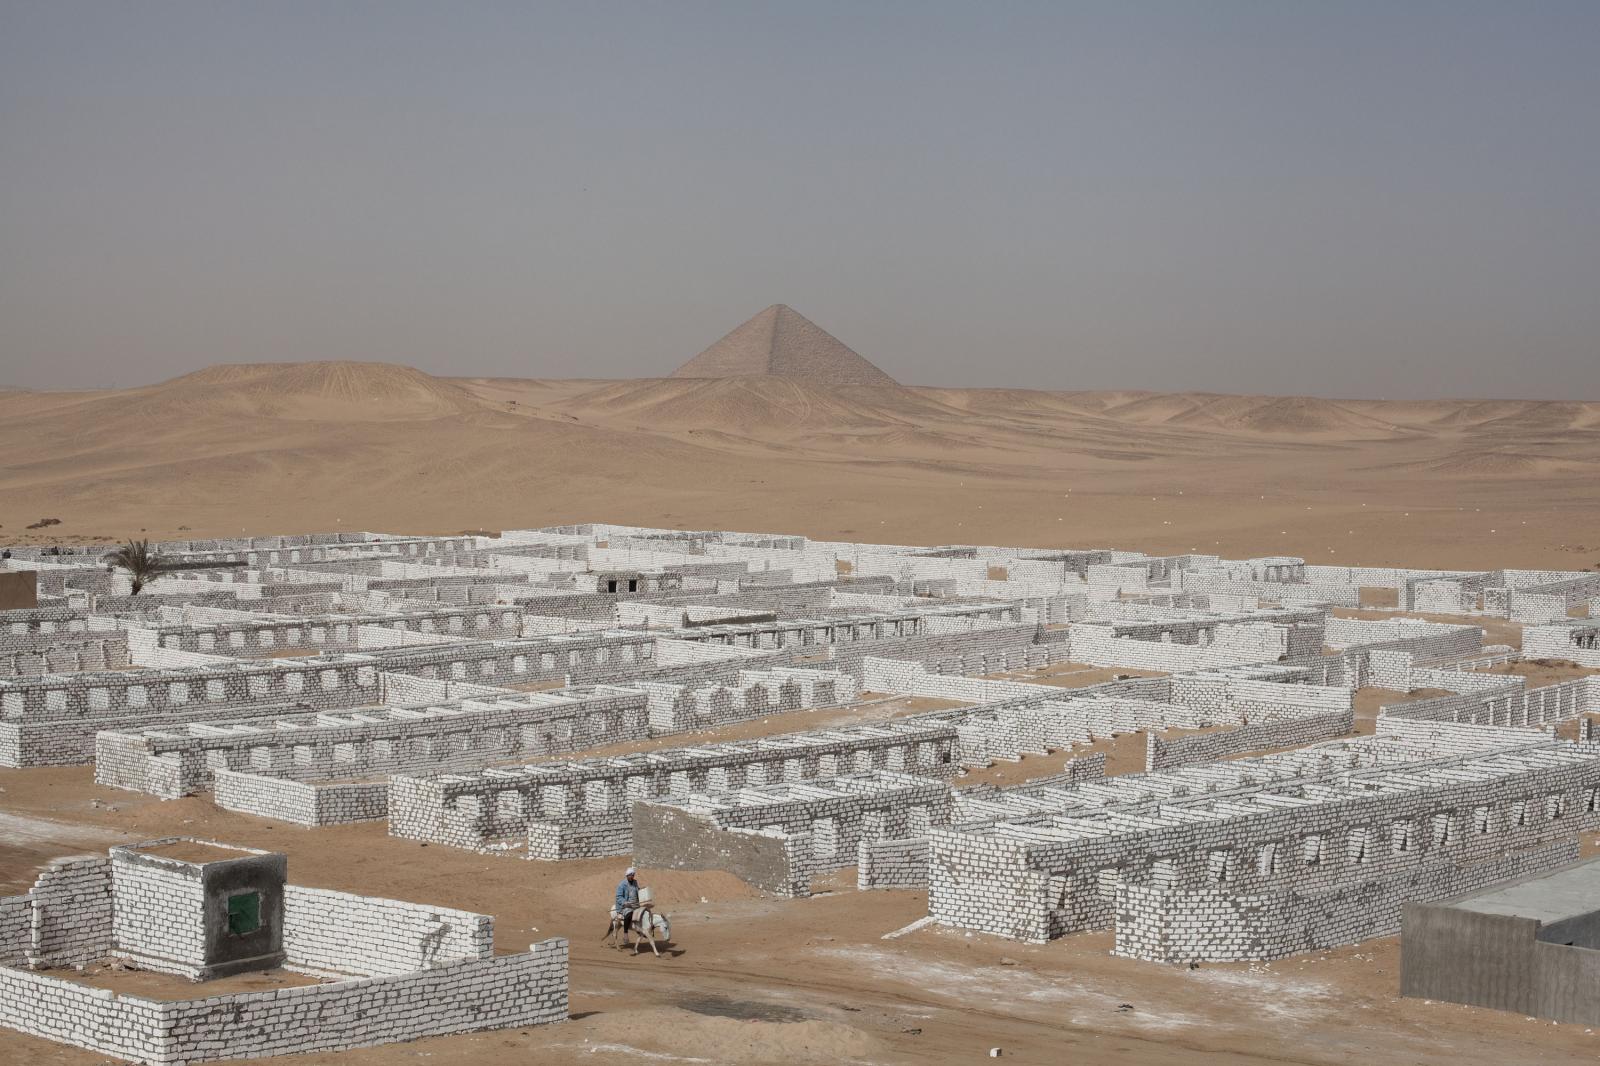 A man on a donkey passing through a white stone wall cemetery. &nbsp;Sneferu&#39;s first smooth sided Red Pyramid can be seen in the distance.